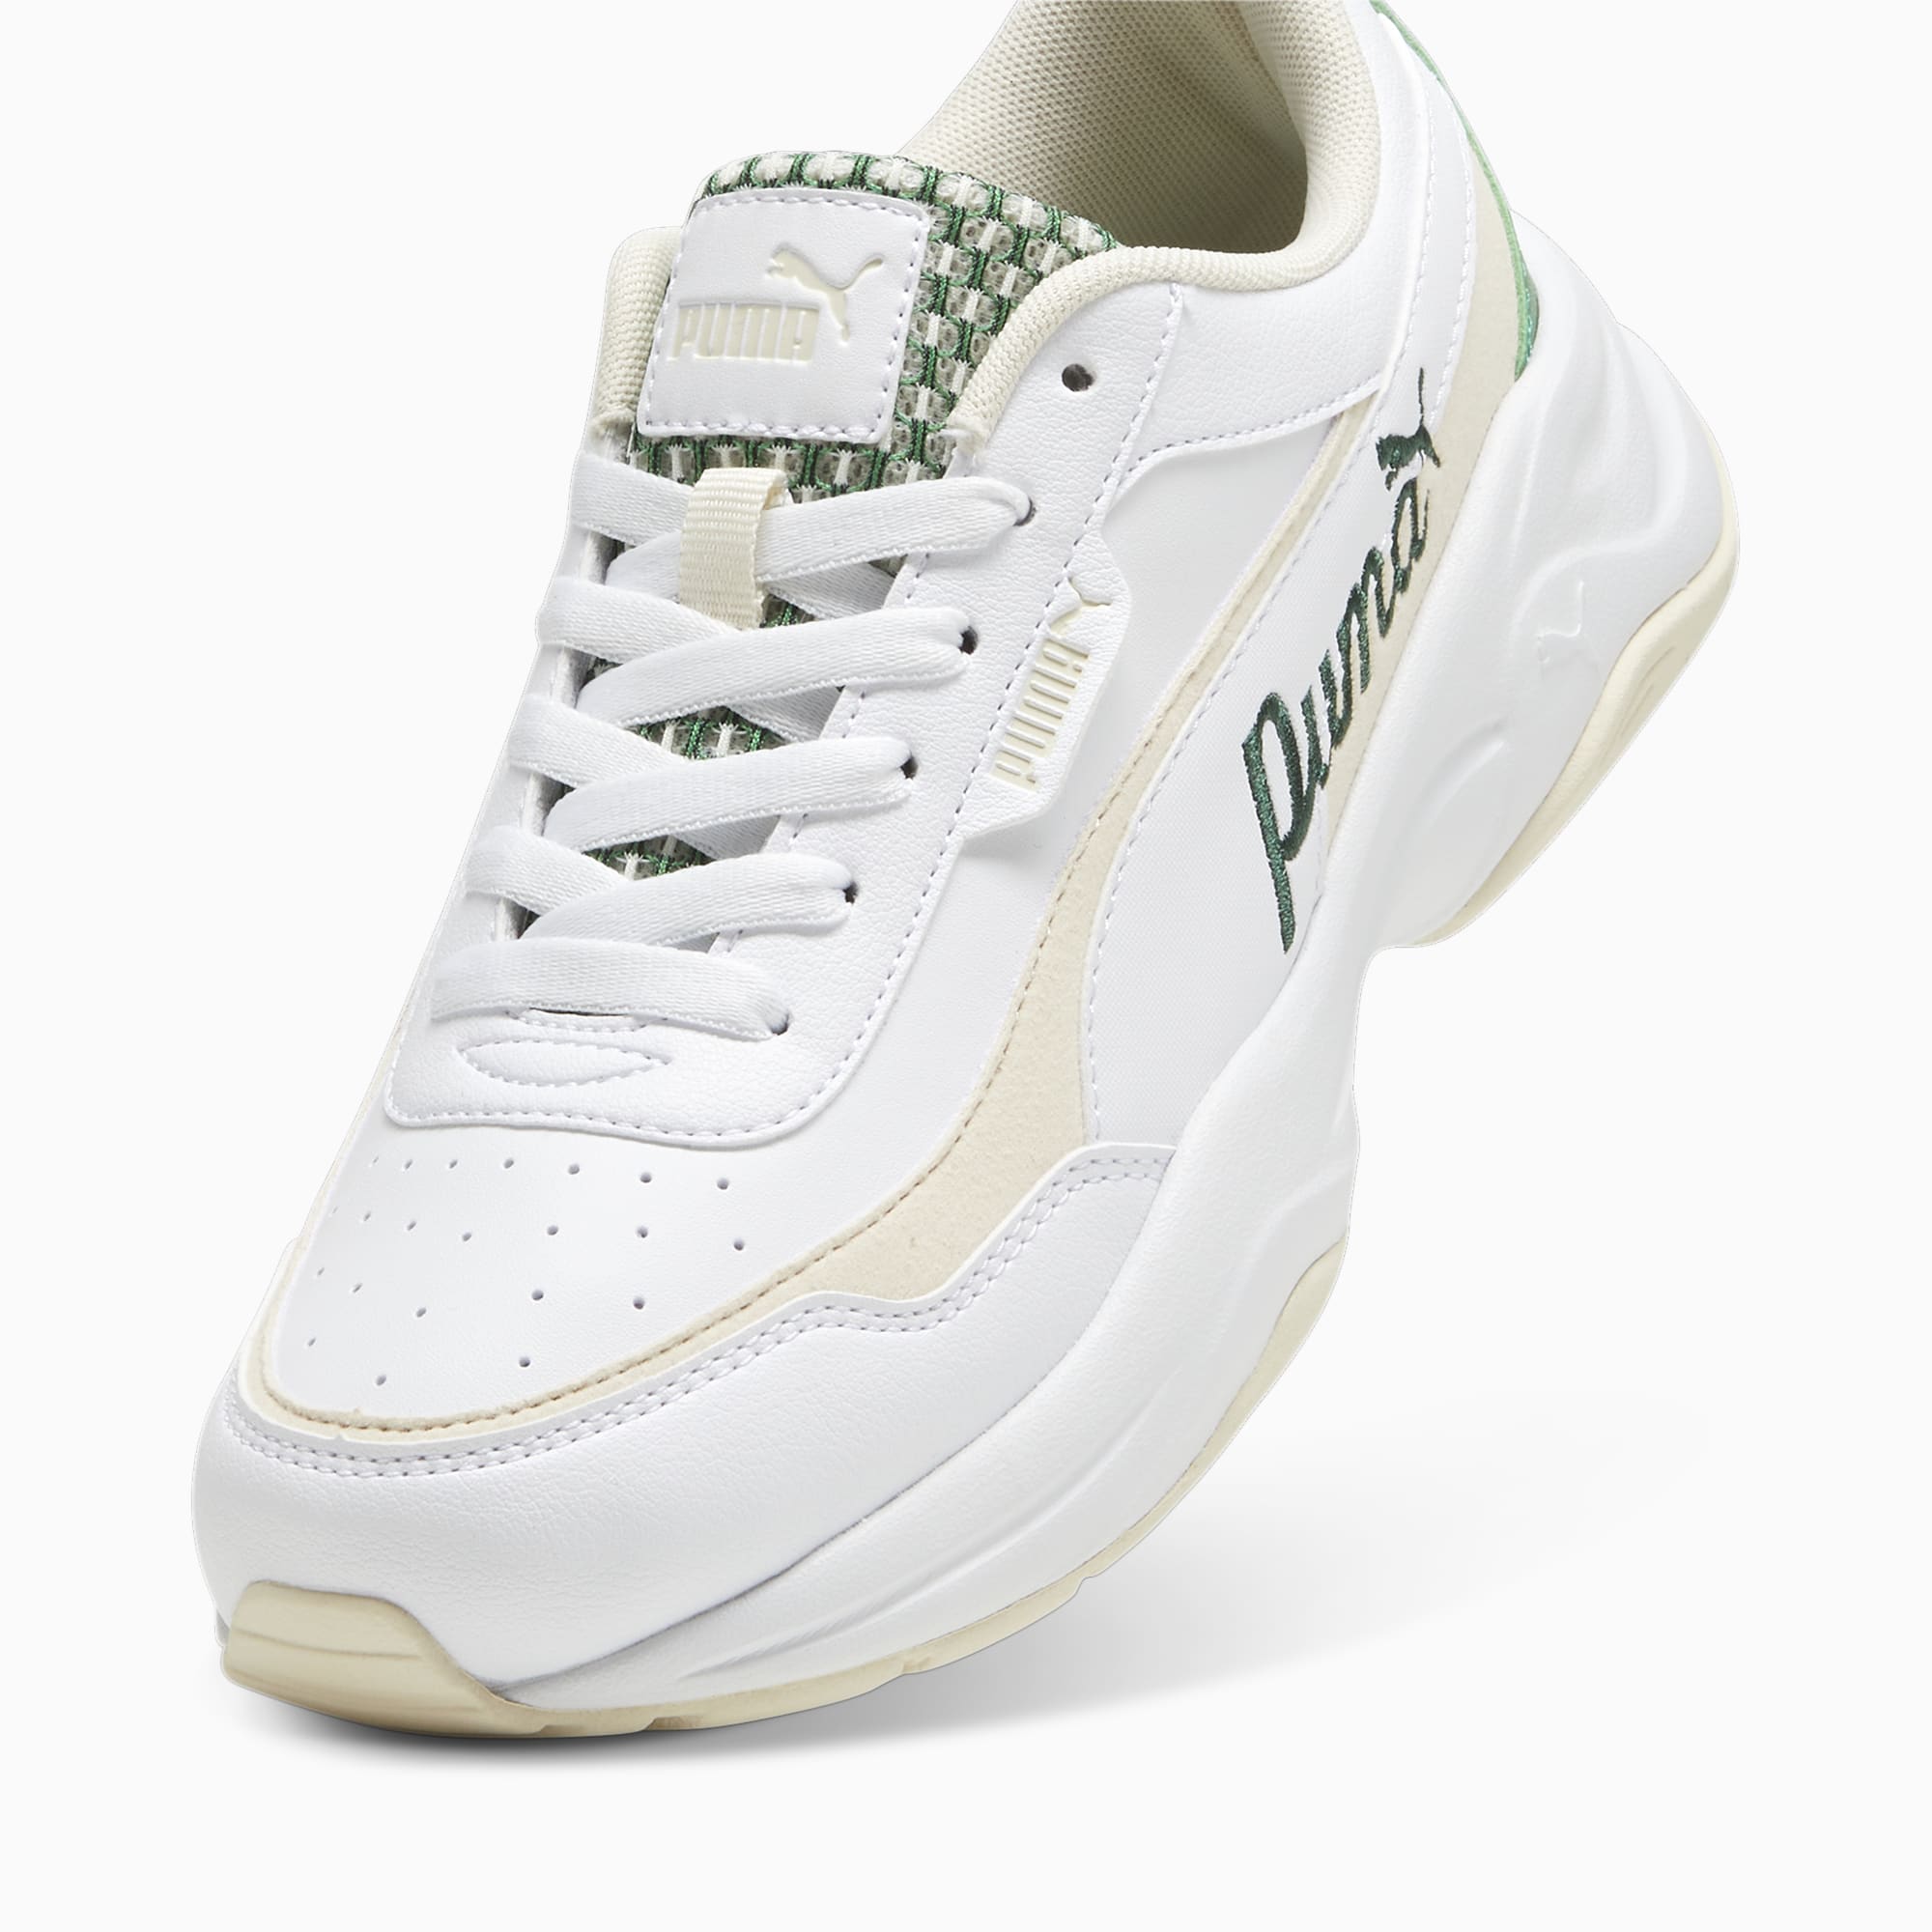 PUMA Cilia Mode Blossom Sneakers Voor Dames, Wit/Groen/Rood